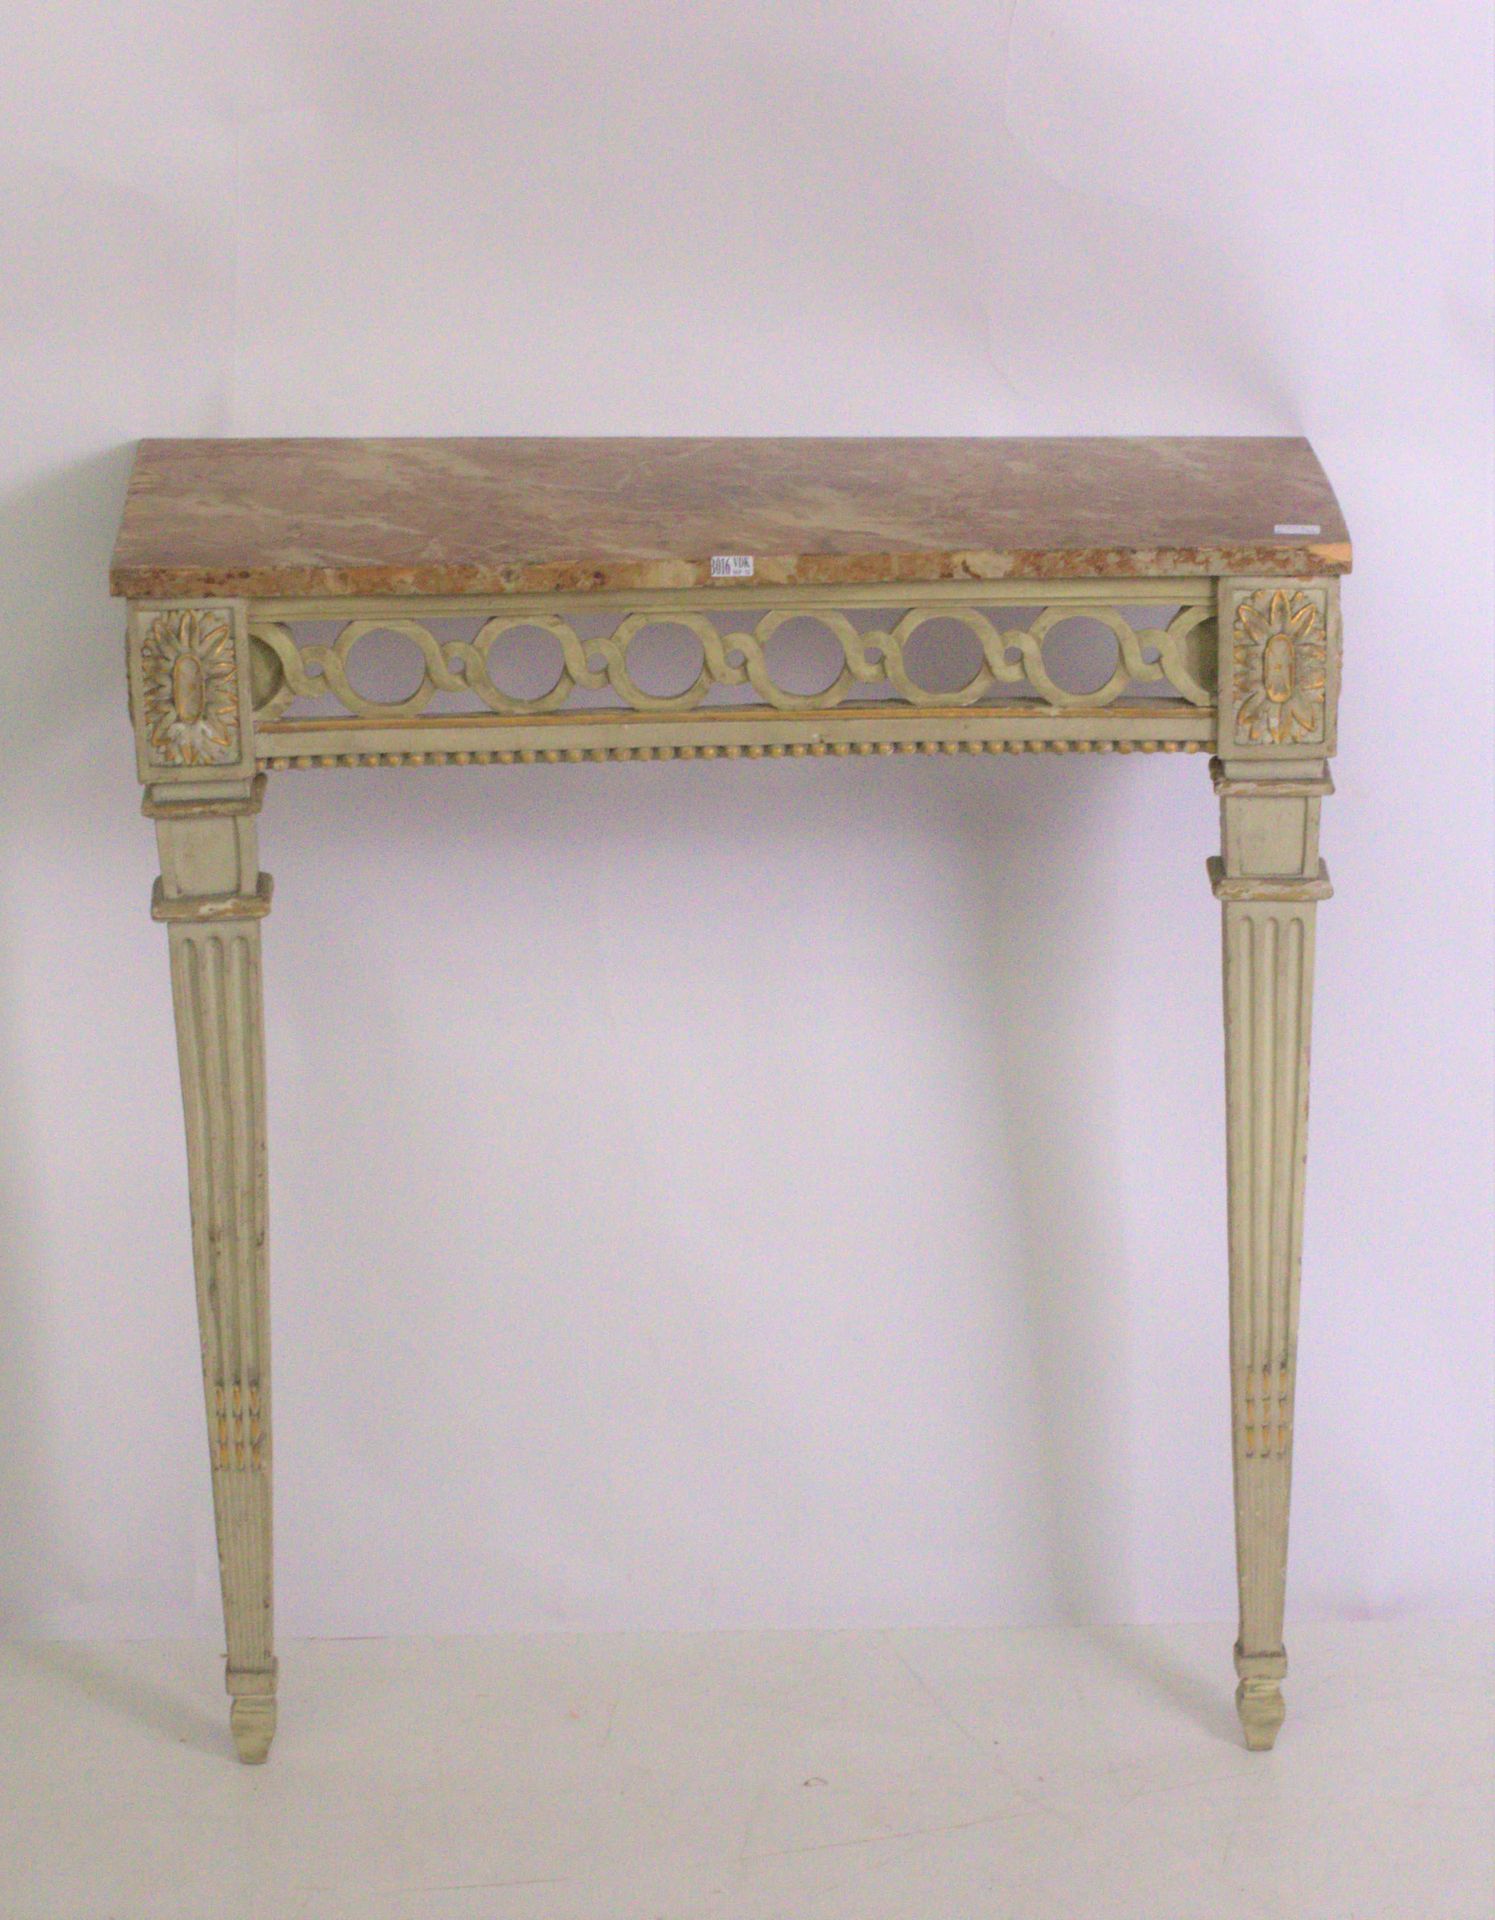 Null Small console in the Louis XVI style. Period : end of XVIIIth century (*).